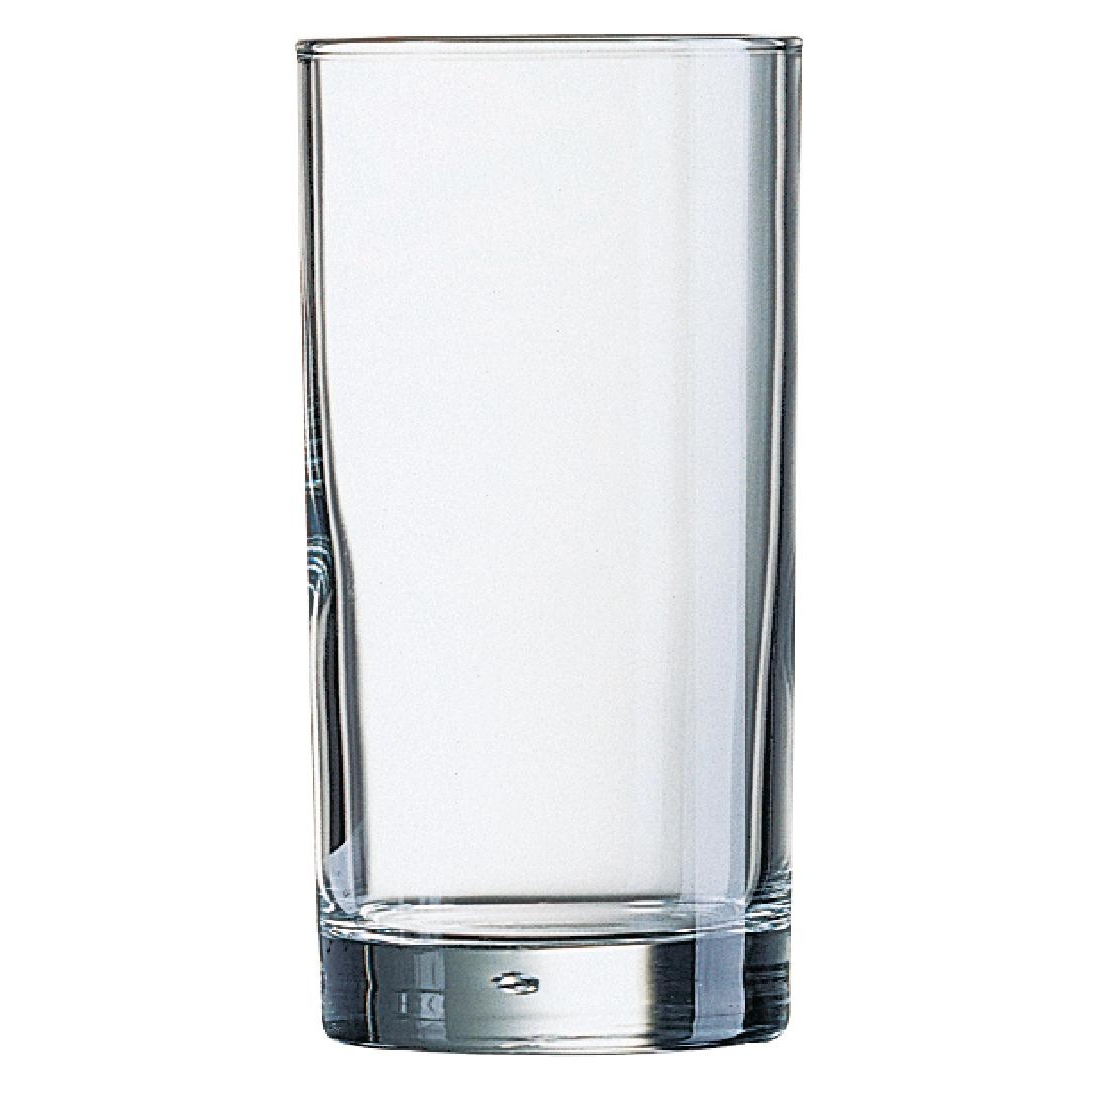 Arcoroc Highball Nucleated Glasses 285ml CE Marked